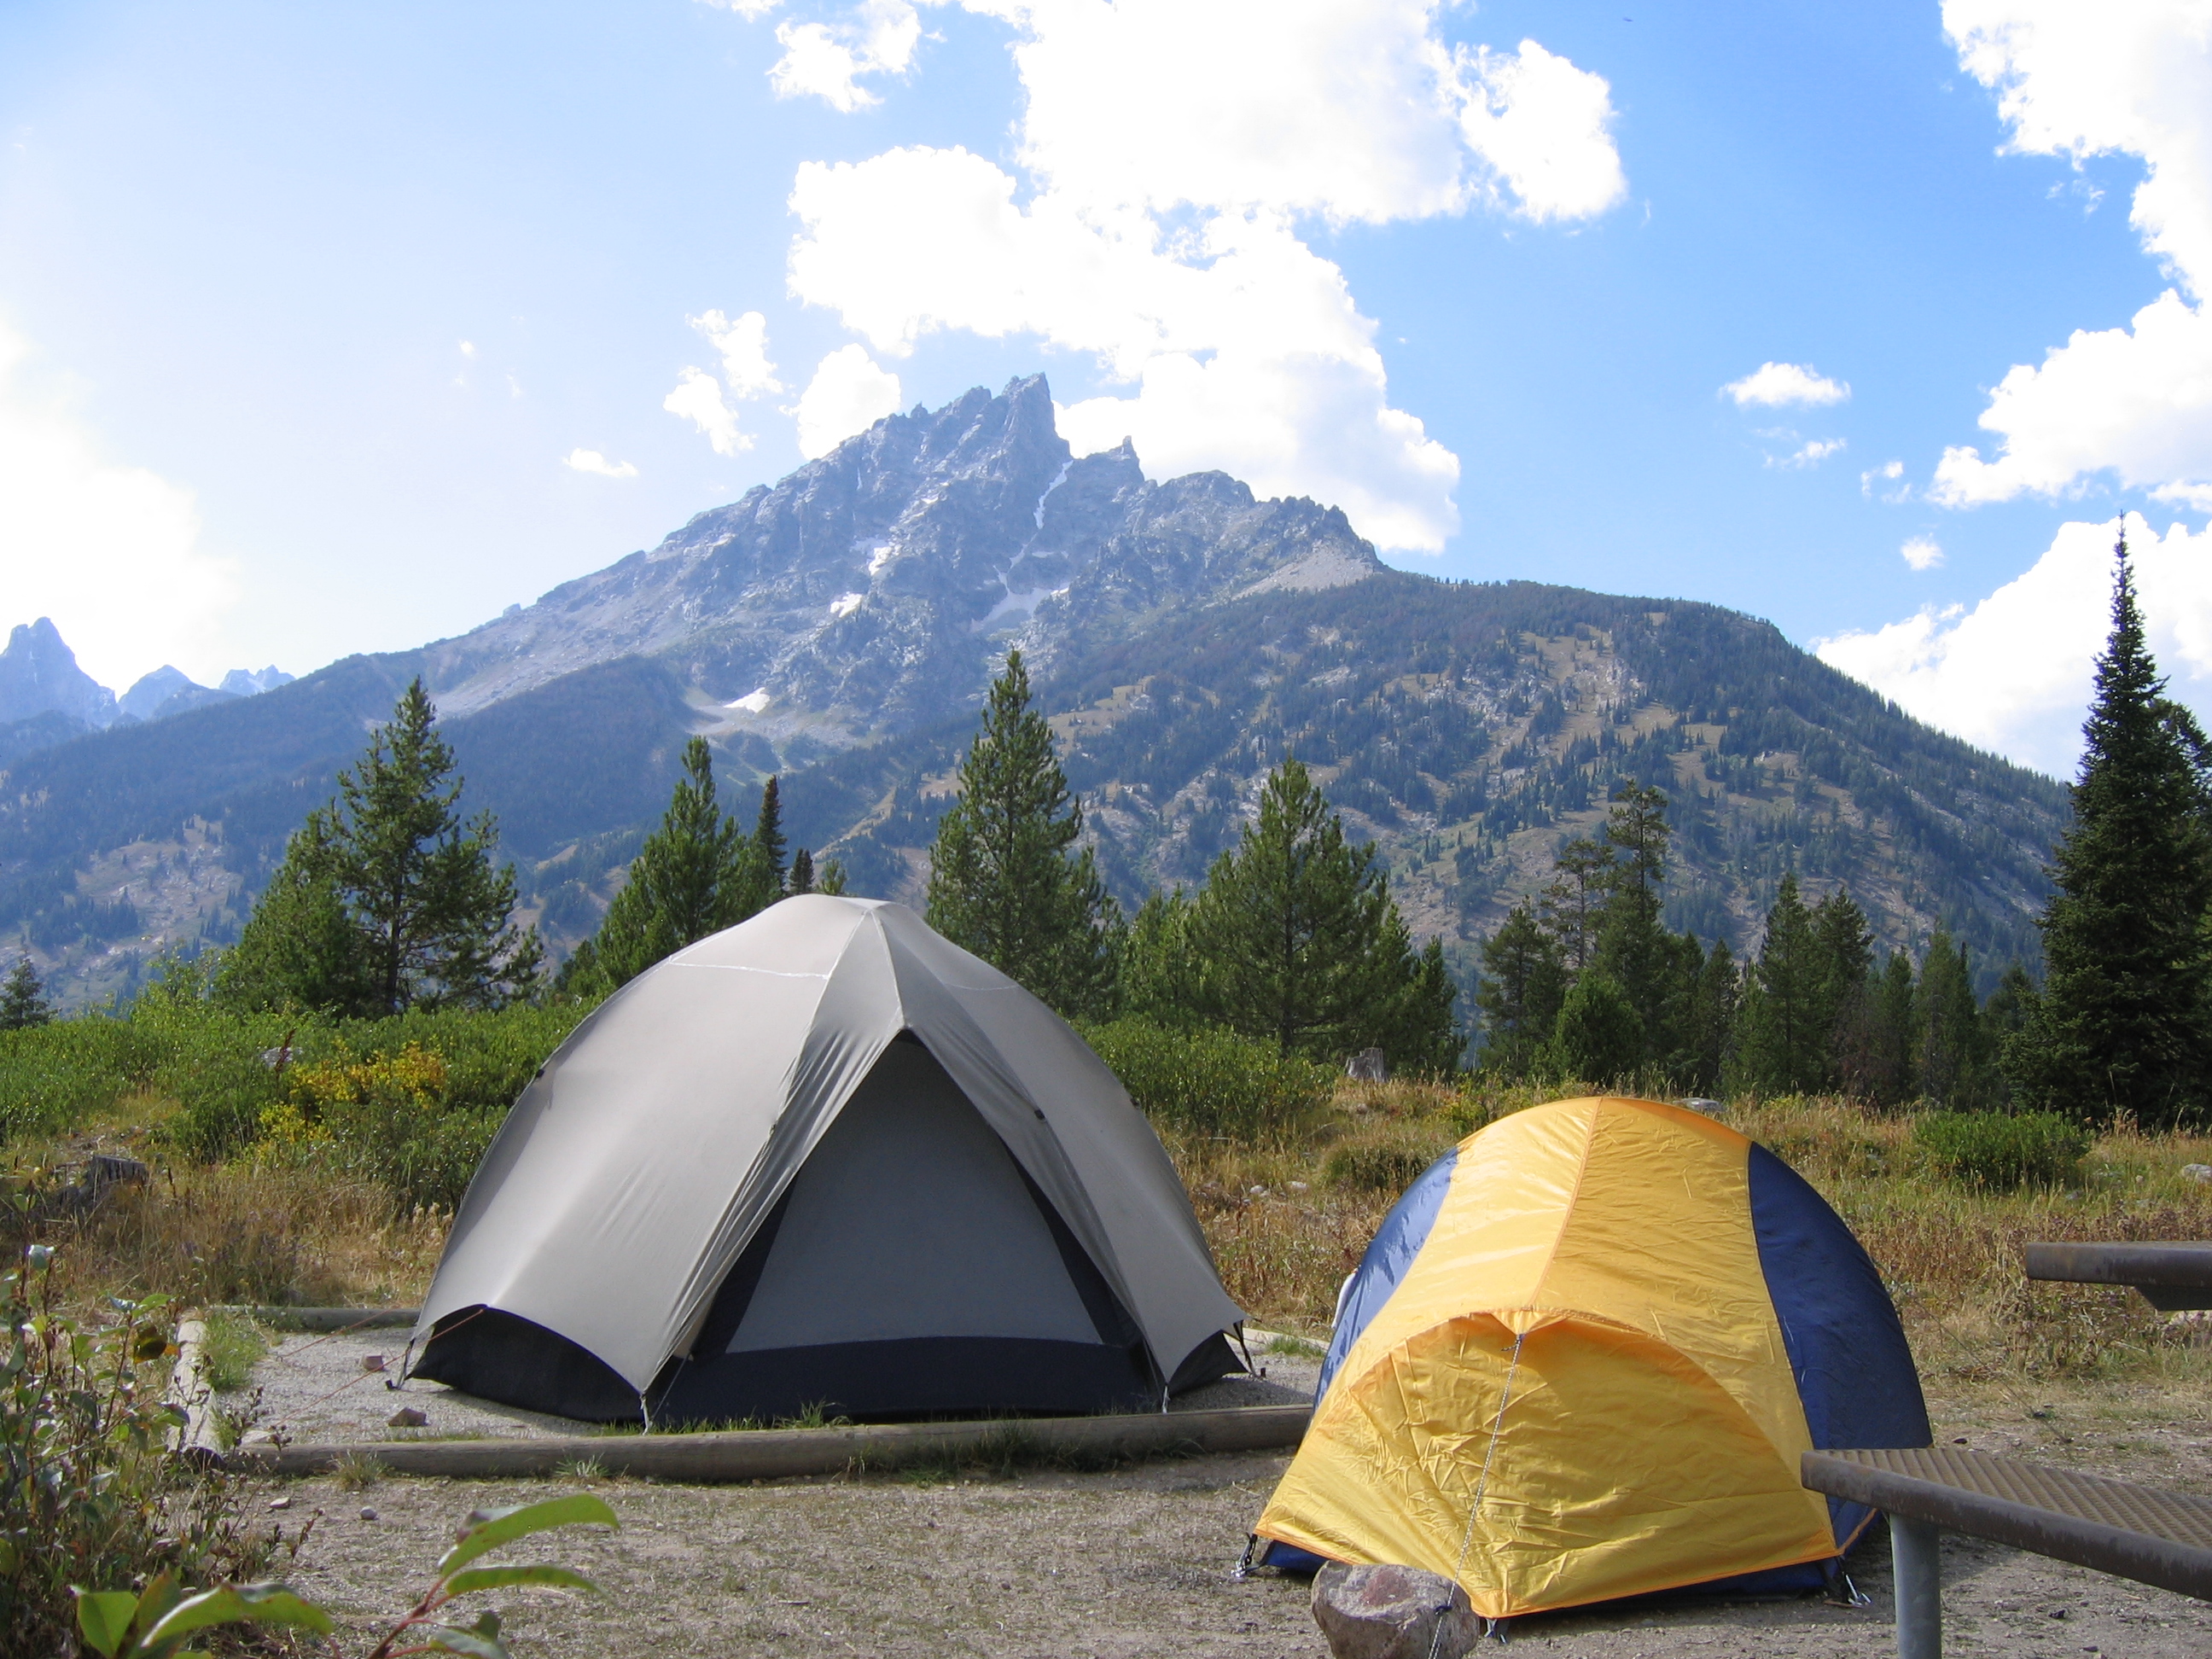 Two tents - one gray and one yellow - with Mount Teewinot in the background